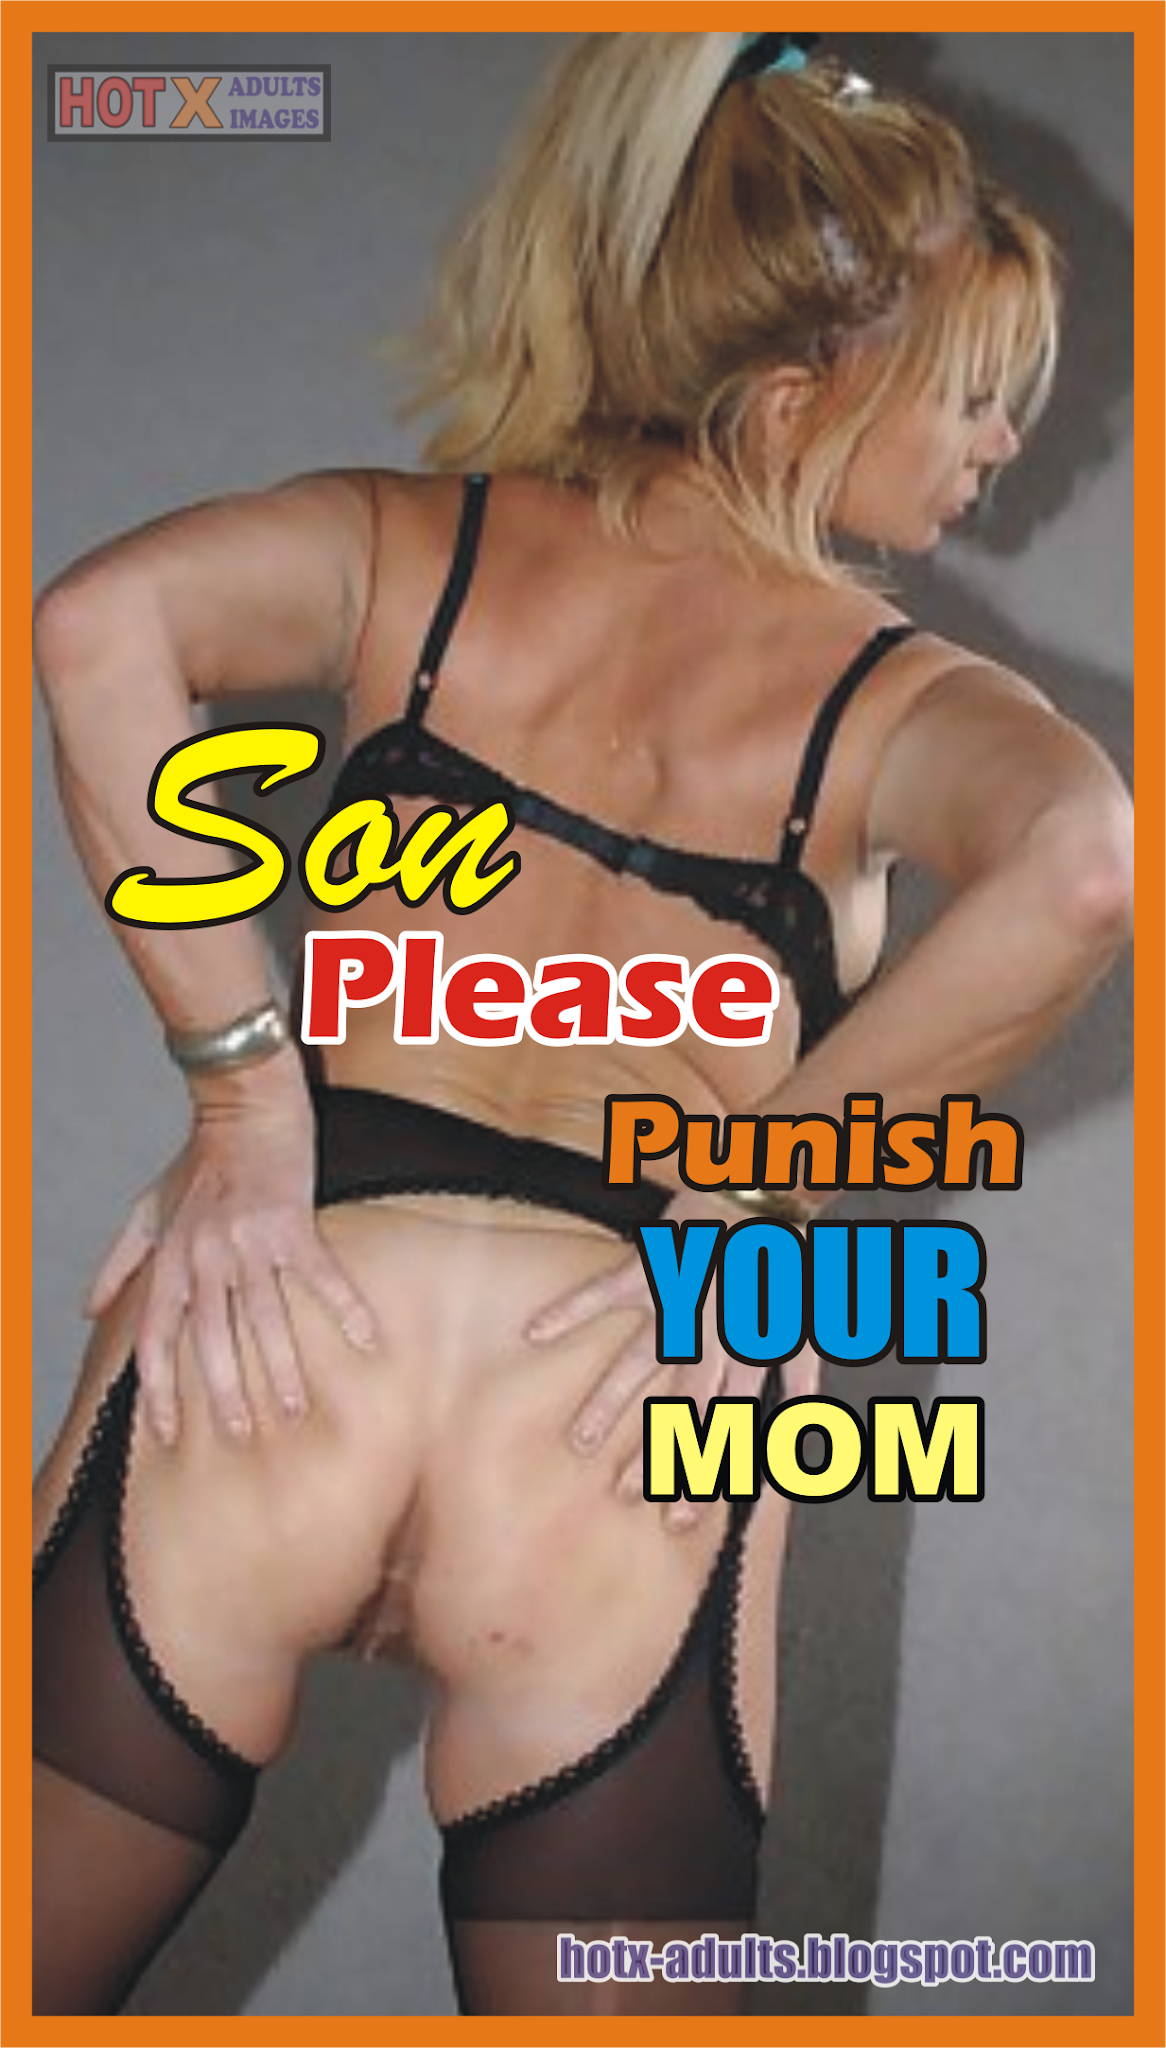 #mom #son #incest #pictures #sexpix #nudity #fuck #incestsex #sister #brother #wife #sexual #porn #xxx #nude #sexual #captioned #images